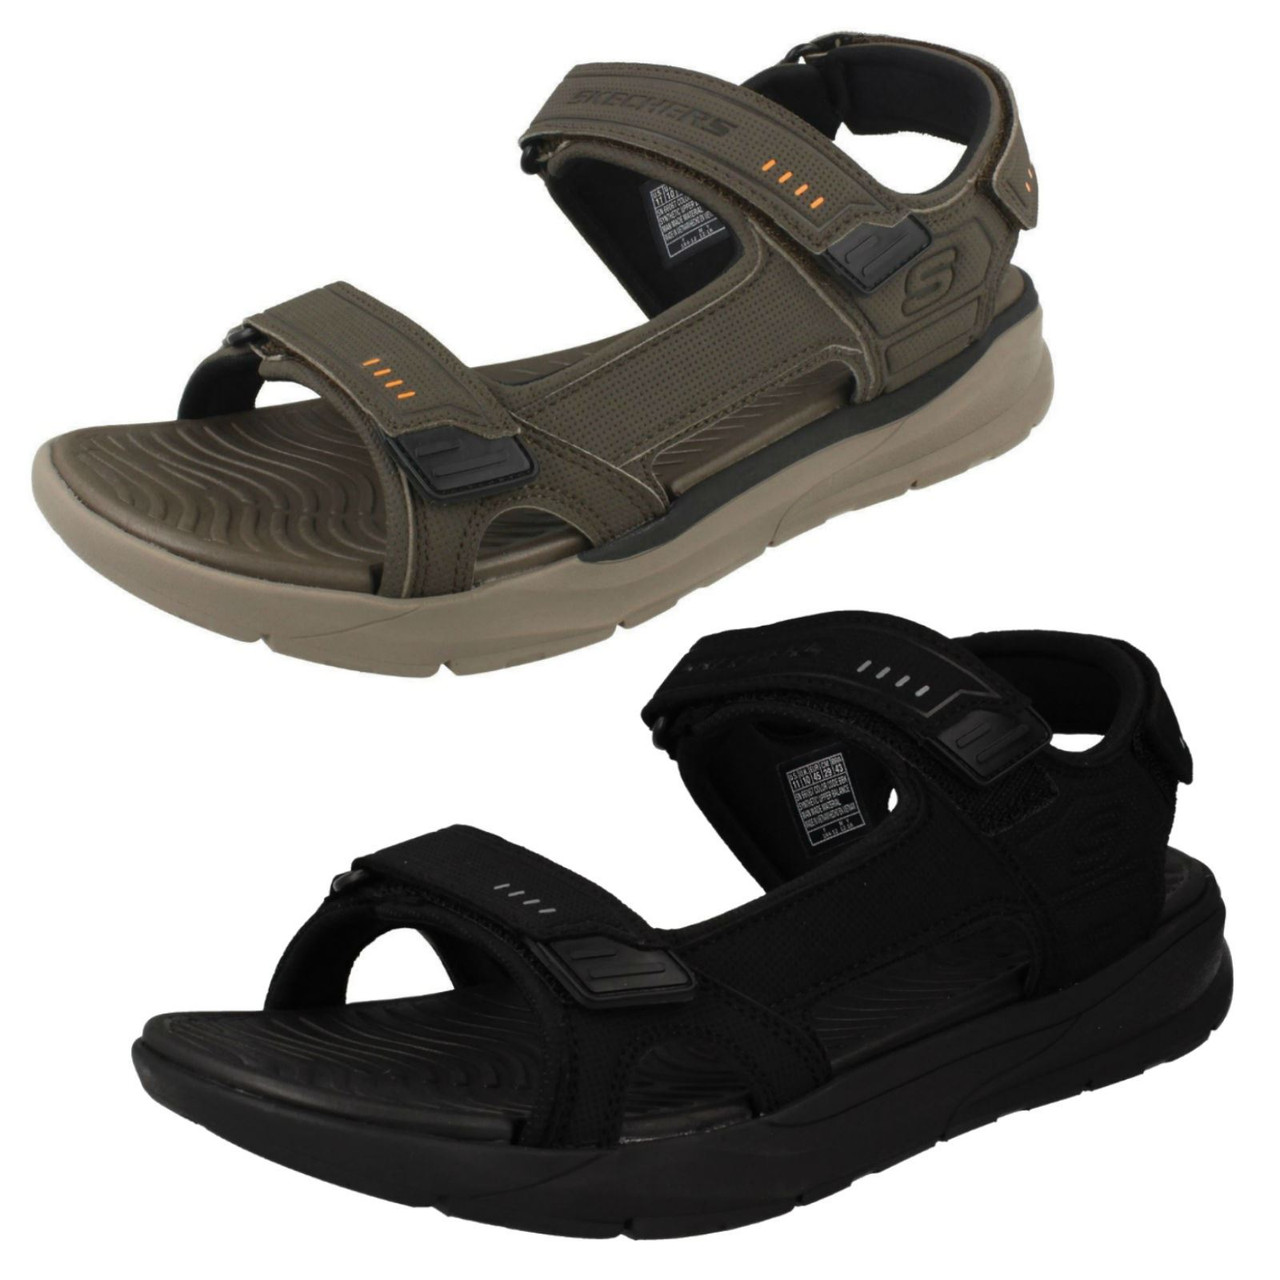 skechers relaxed fit sandals 